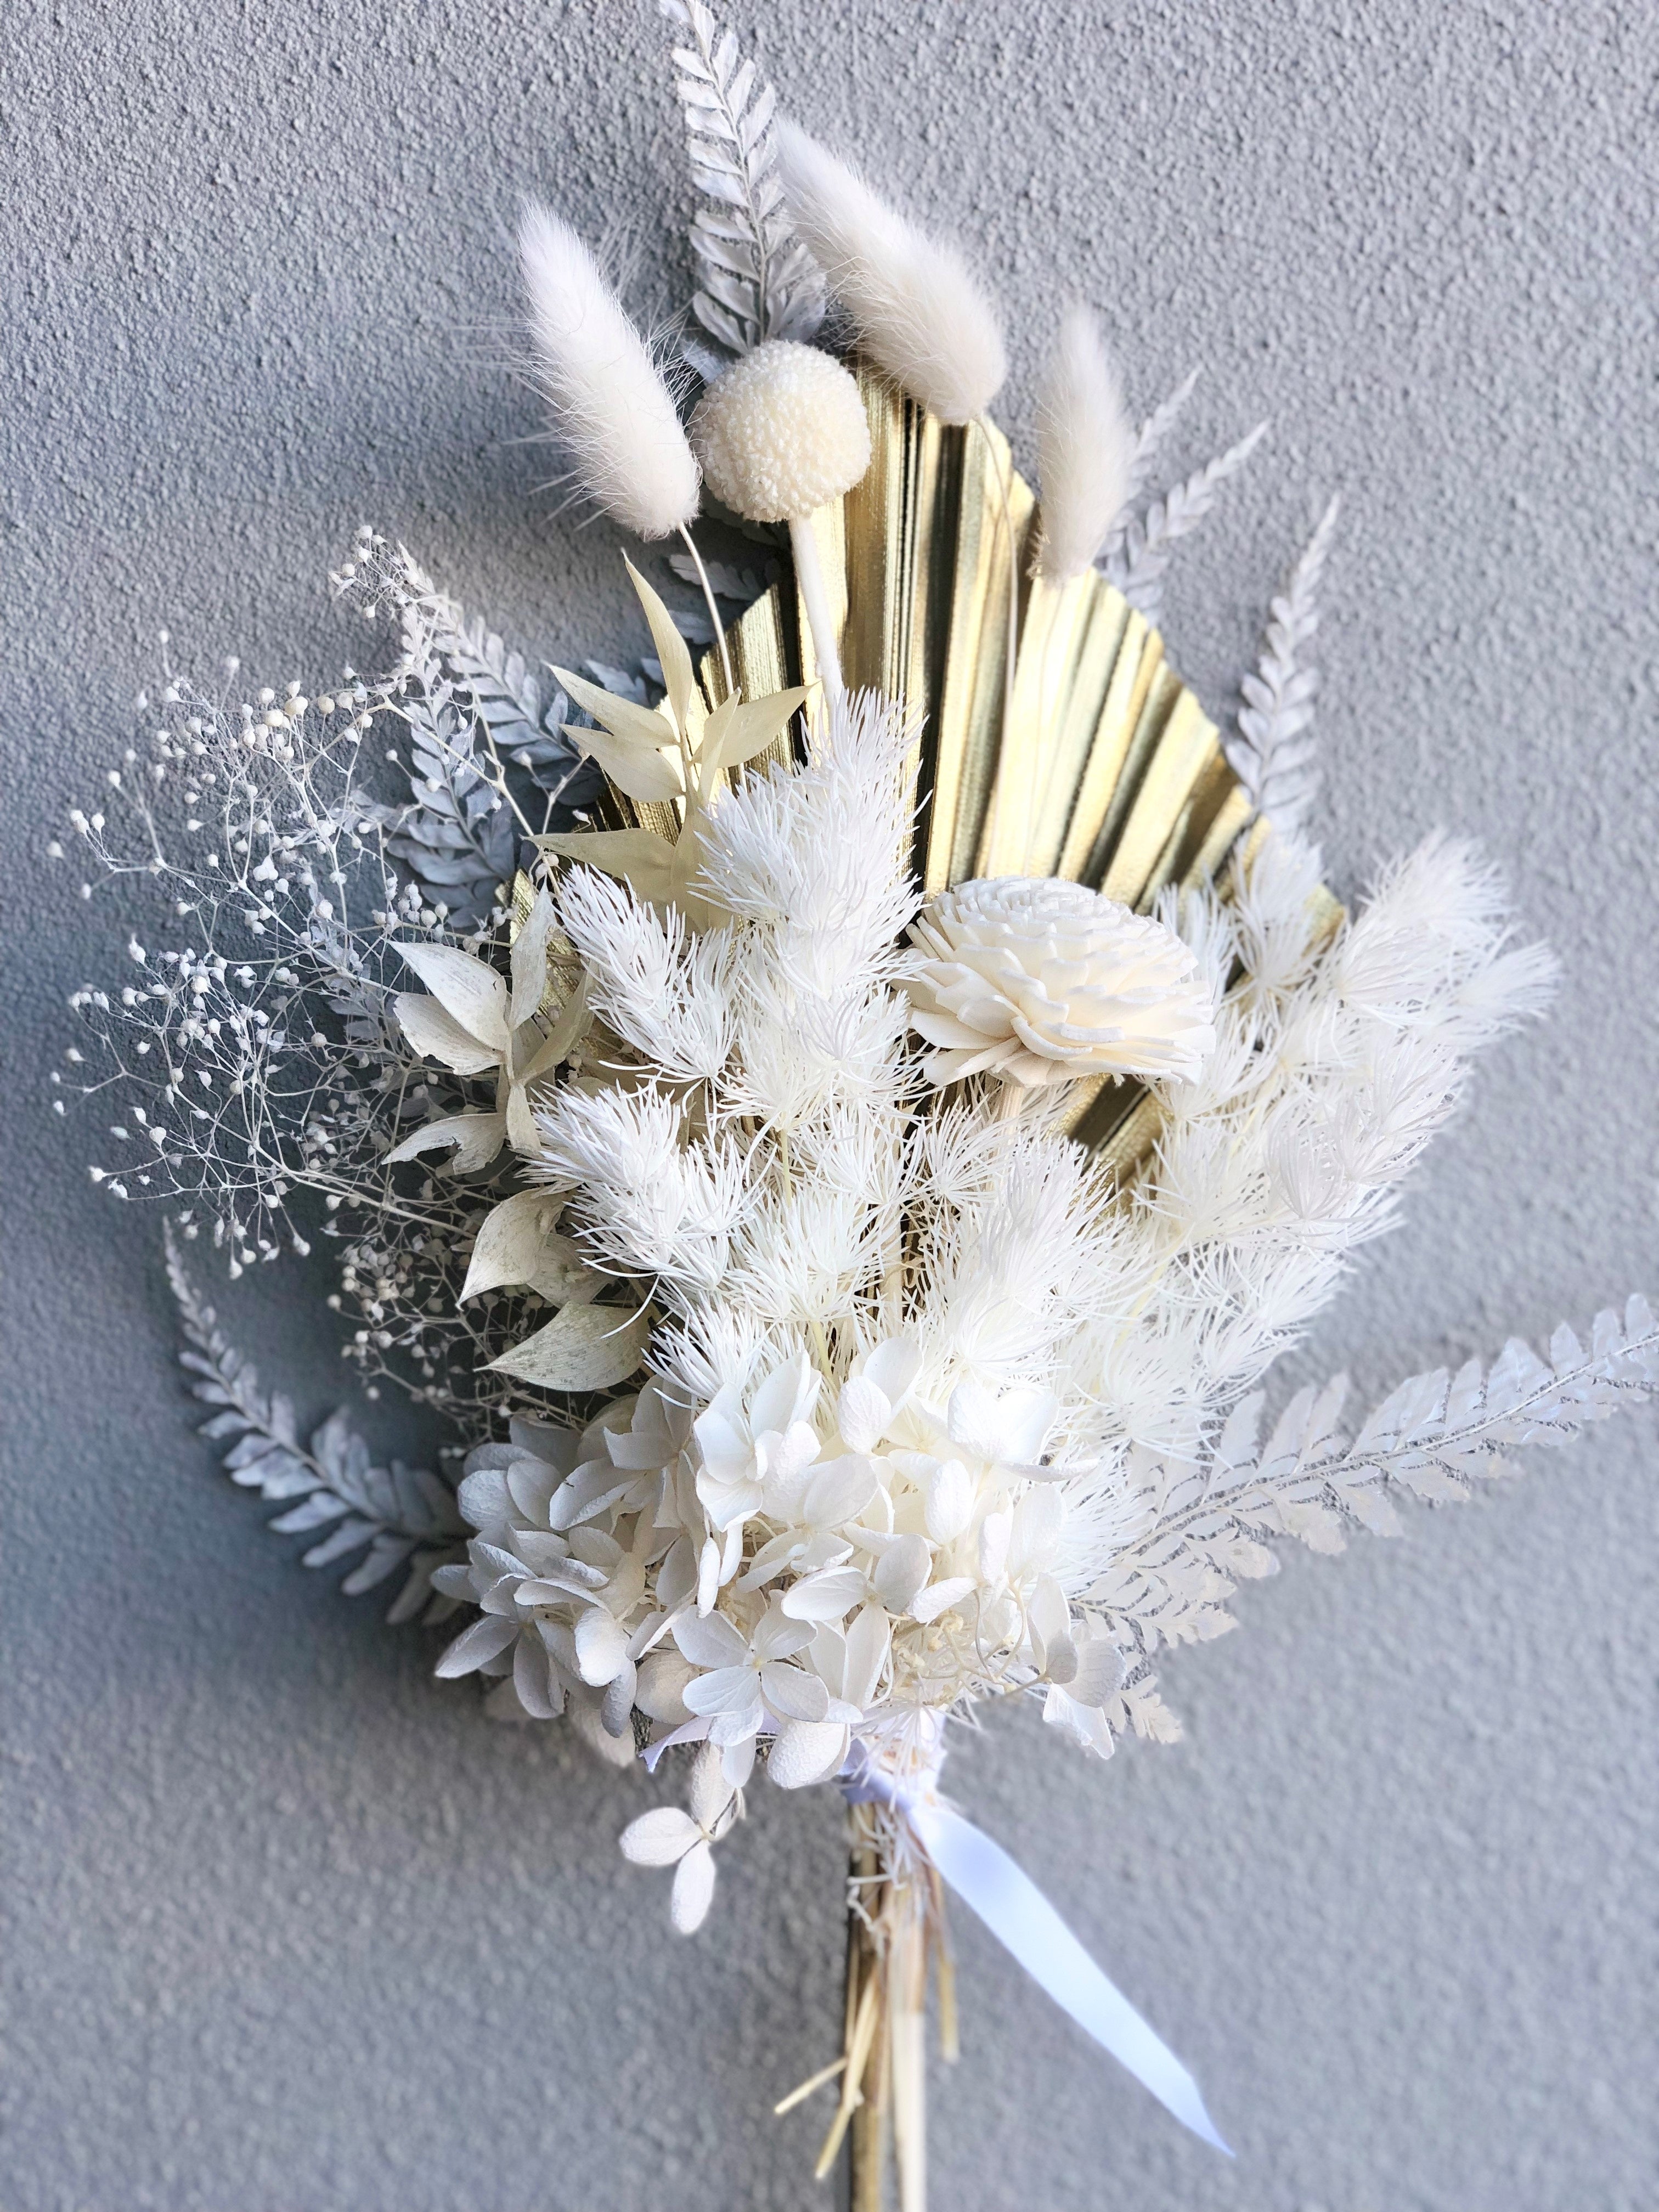 Dried Flowers - White and Gold